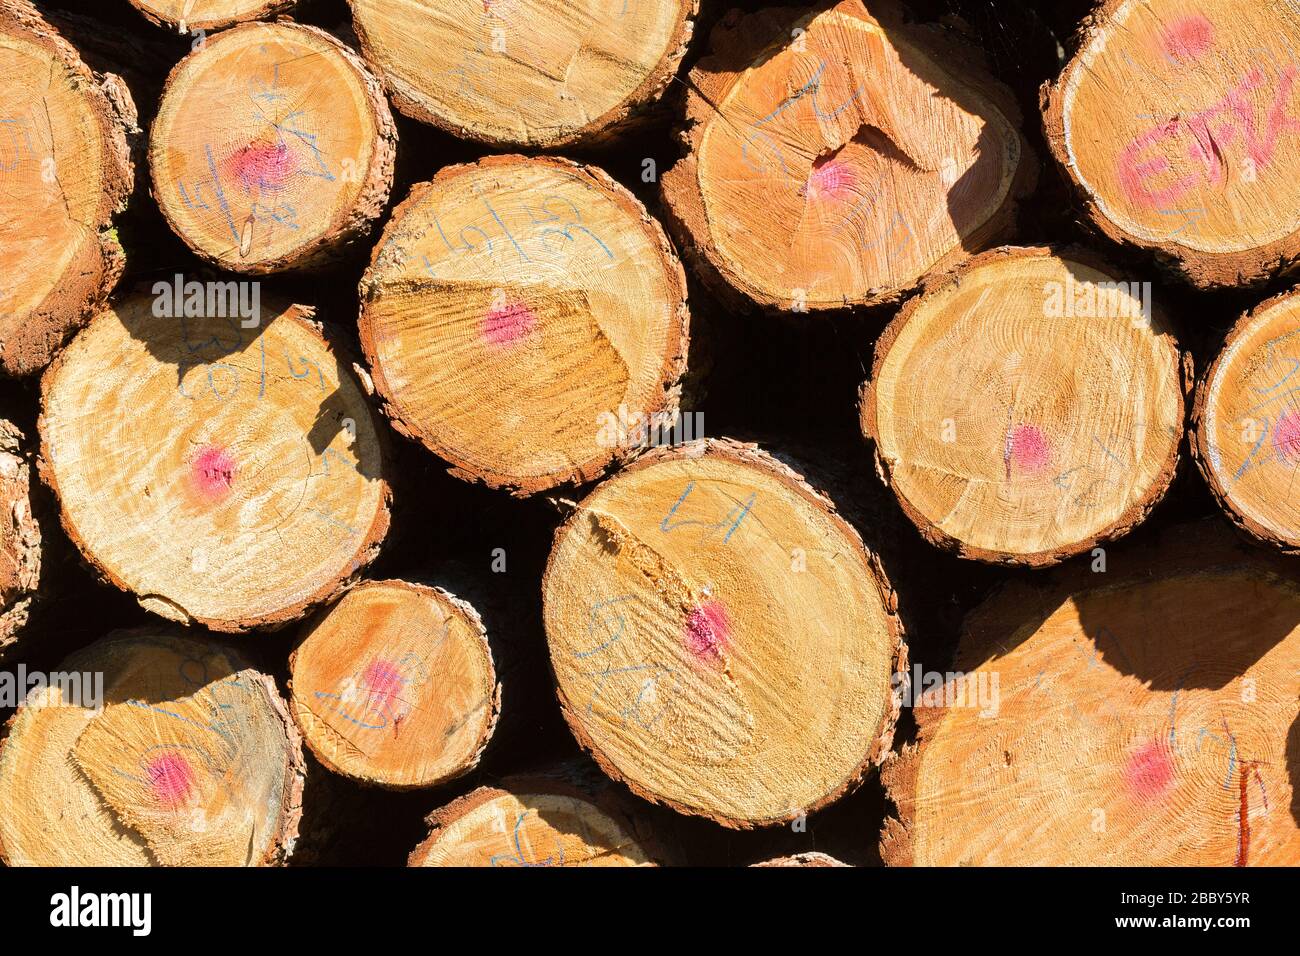 Close up of log pile / cut wood. Fresh cut, with markings. Concept for forestry, logging industry, timber, chopped wood and deforestation. Stock Photo